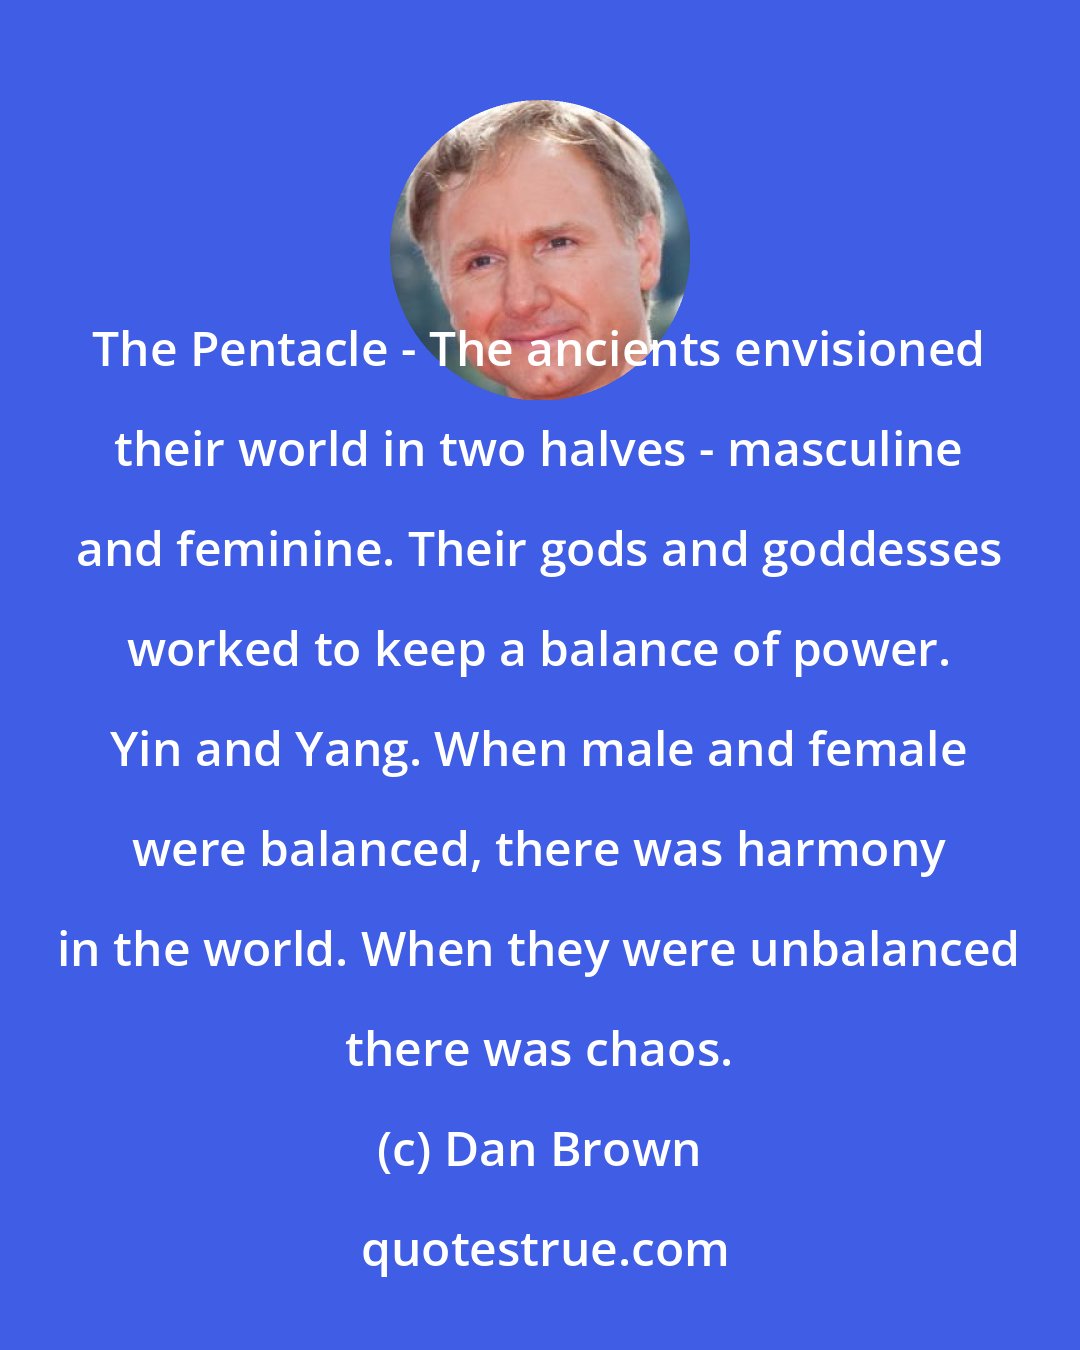 Dan Brown: The Pentacle - The ancients envisioned their world in two halves - masculine and feminine. Their gods and goddesses worked to keep a balance of power. Yin and Yang. When male and female were balanced, there was harmony in the world. When they were unbalanced there was chaos.